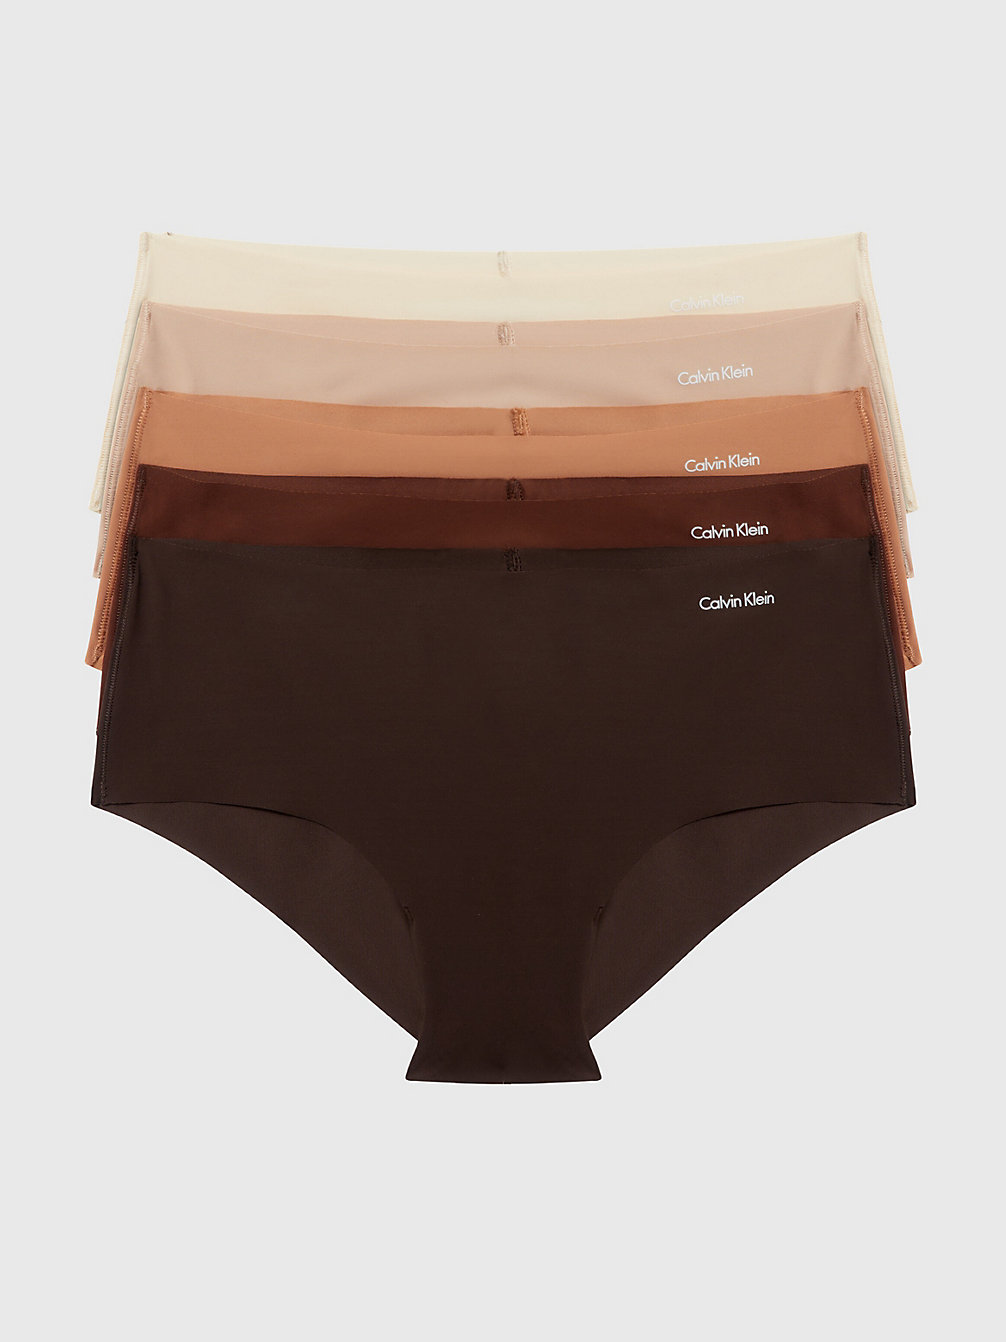 NATURALS 5 Pack Hipster Panties - Invisibles undefined women Calvin Klein